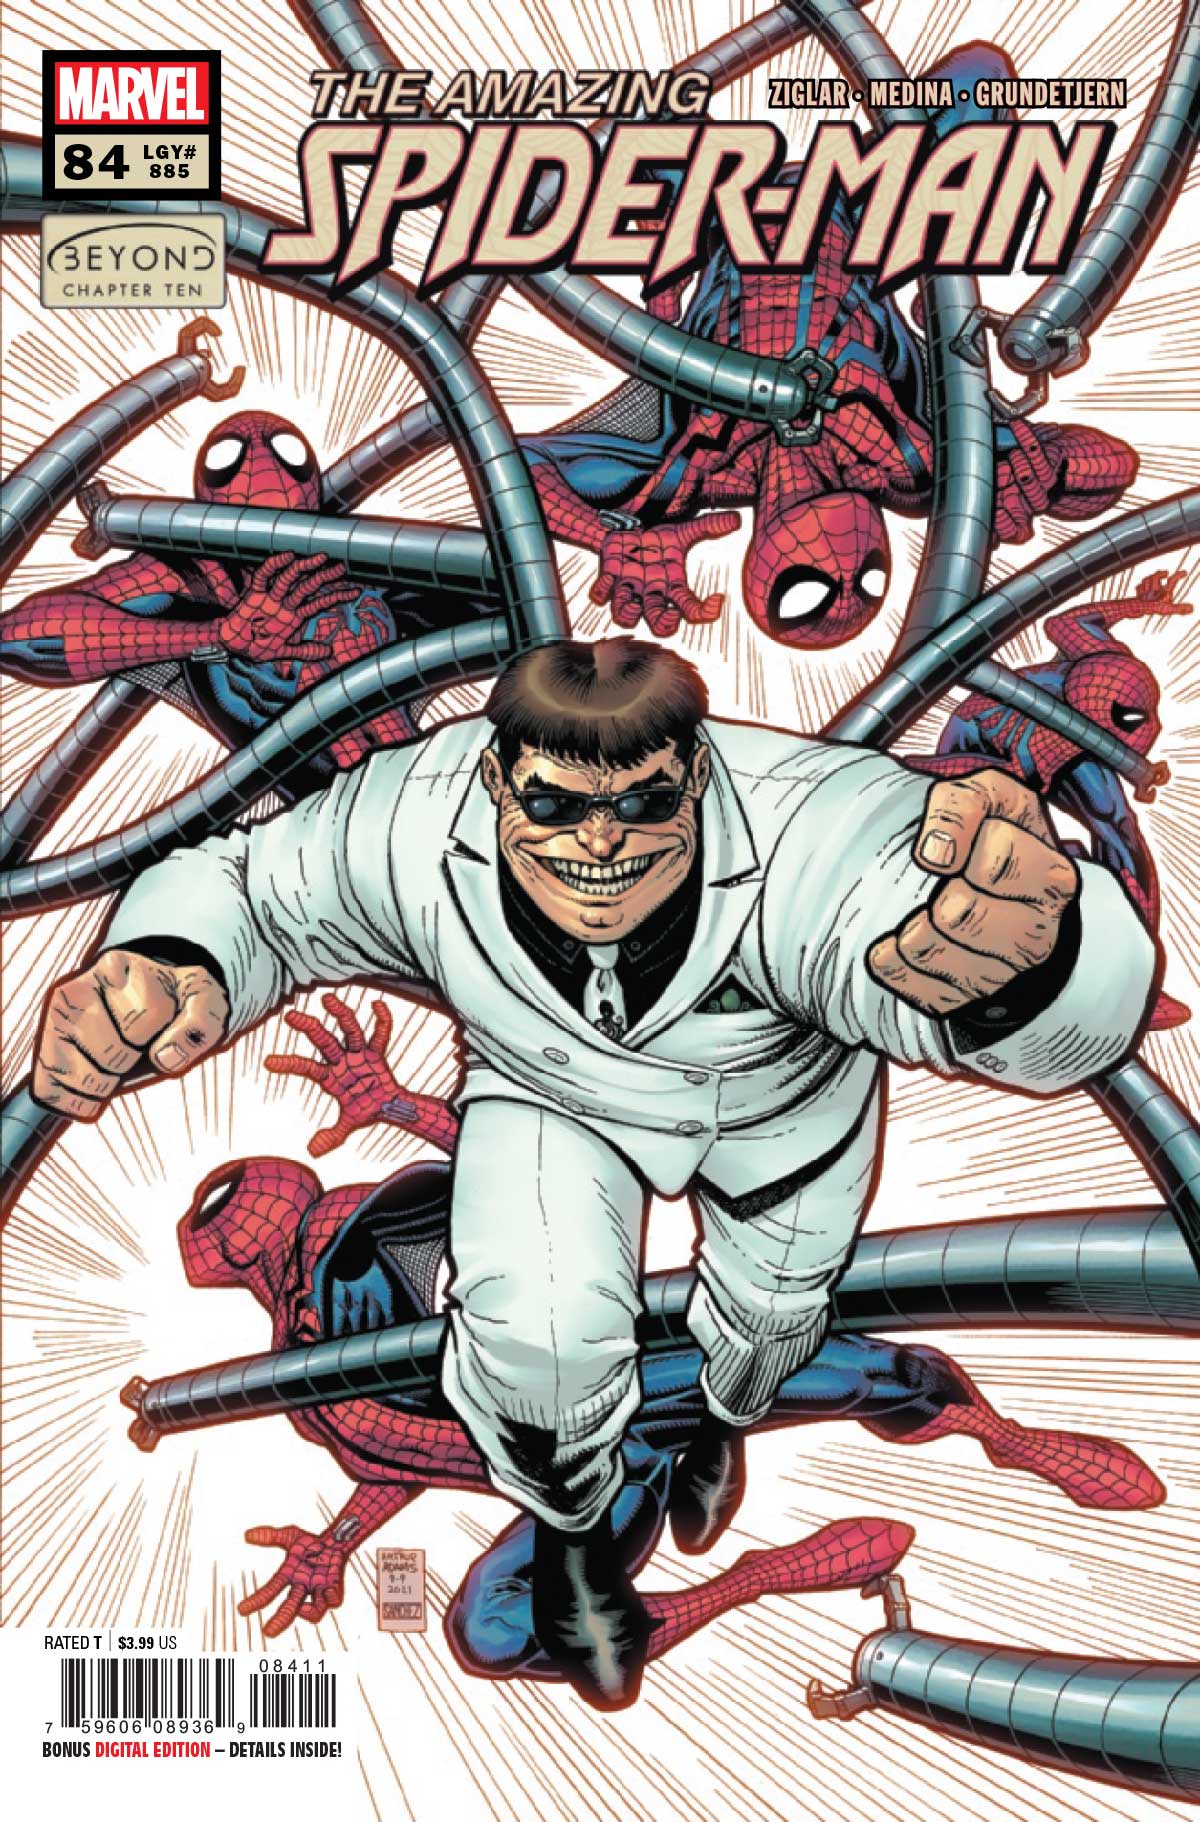 The Amazing Spider-Man (2022) #10 by Zeb Wells